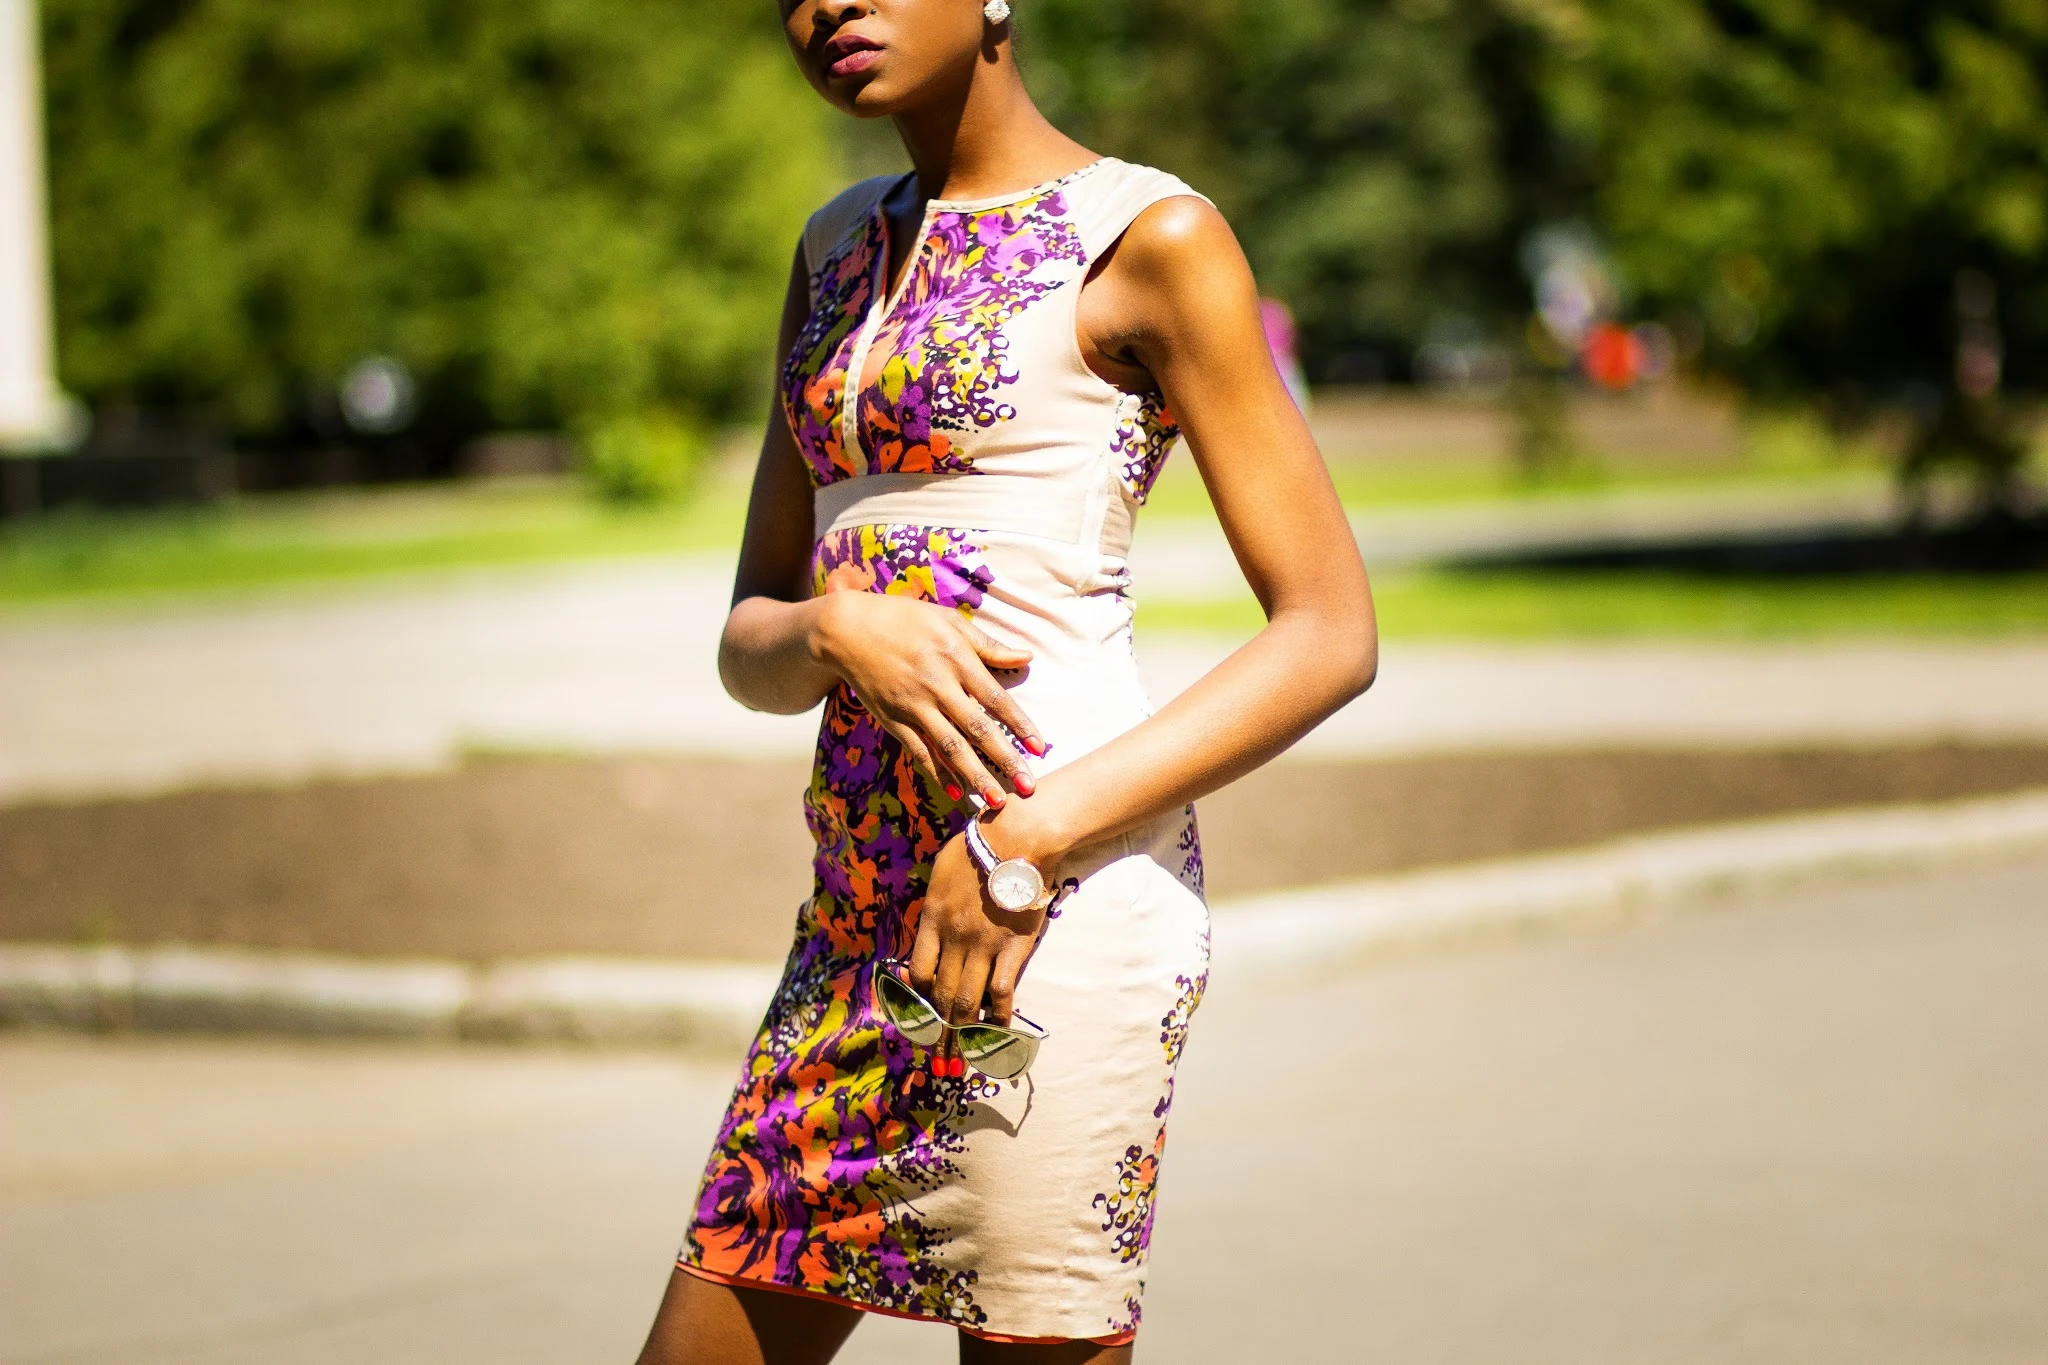 A stunning floral midi dress with orange and yellow flower designs, paired with bold purple and black gladiator heels.